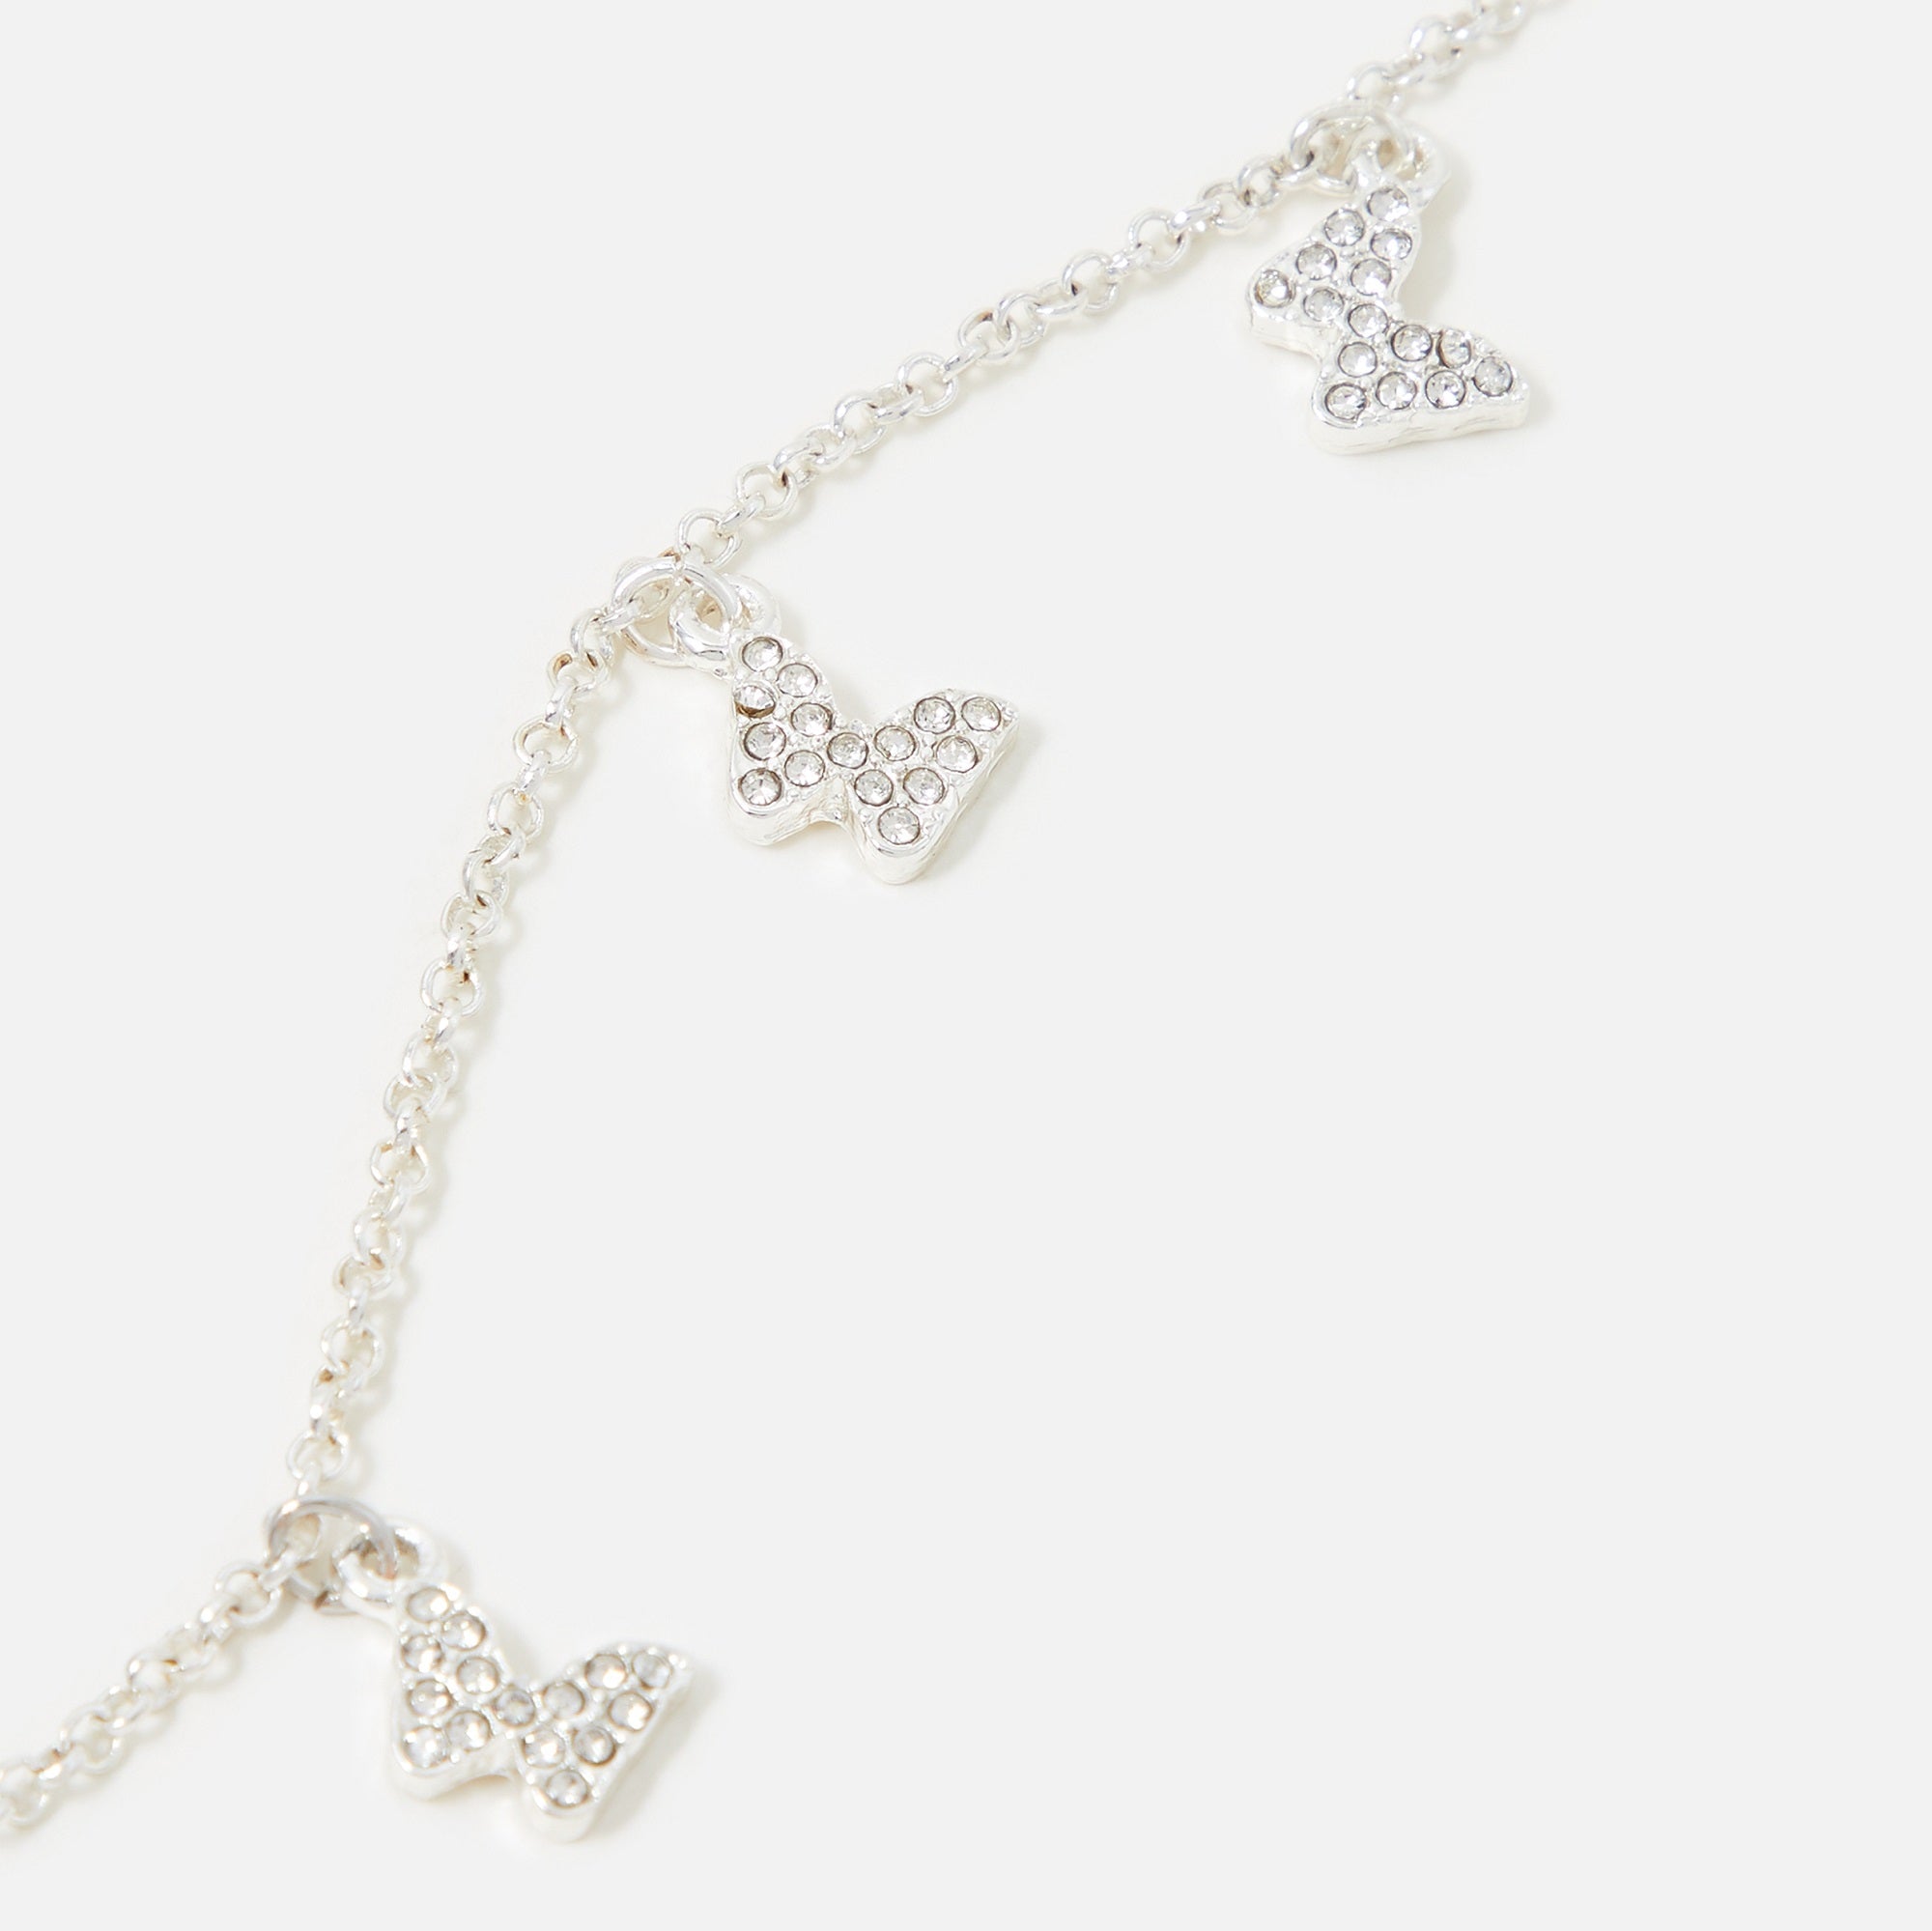 Accessorize London Women's Silver Pave Butterfly Anklet Jewellery